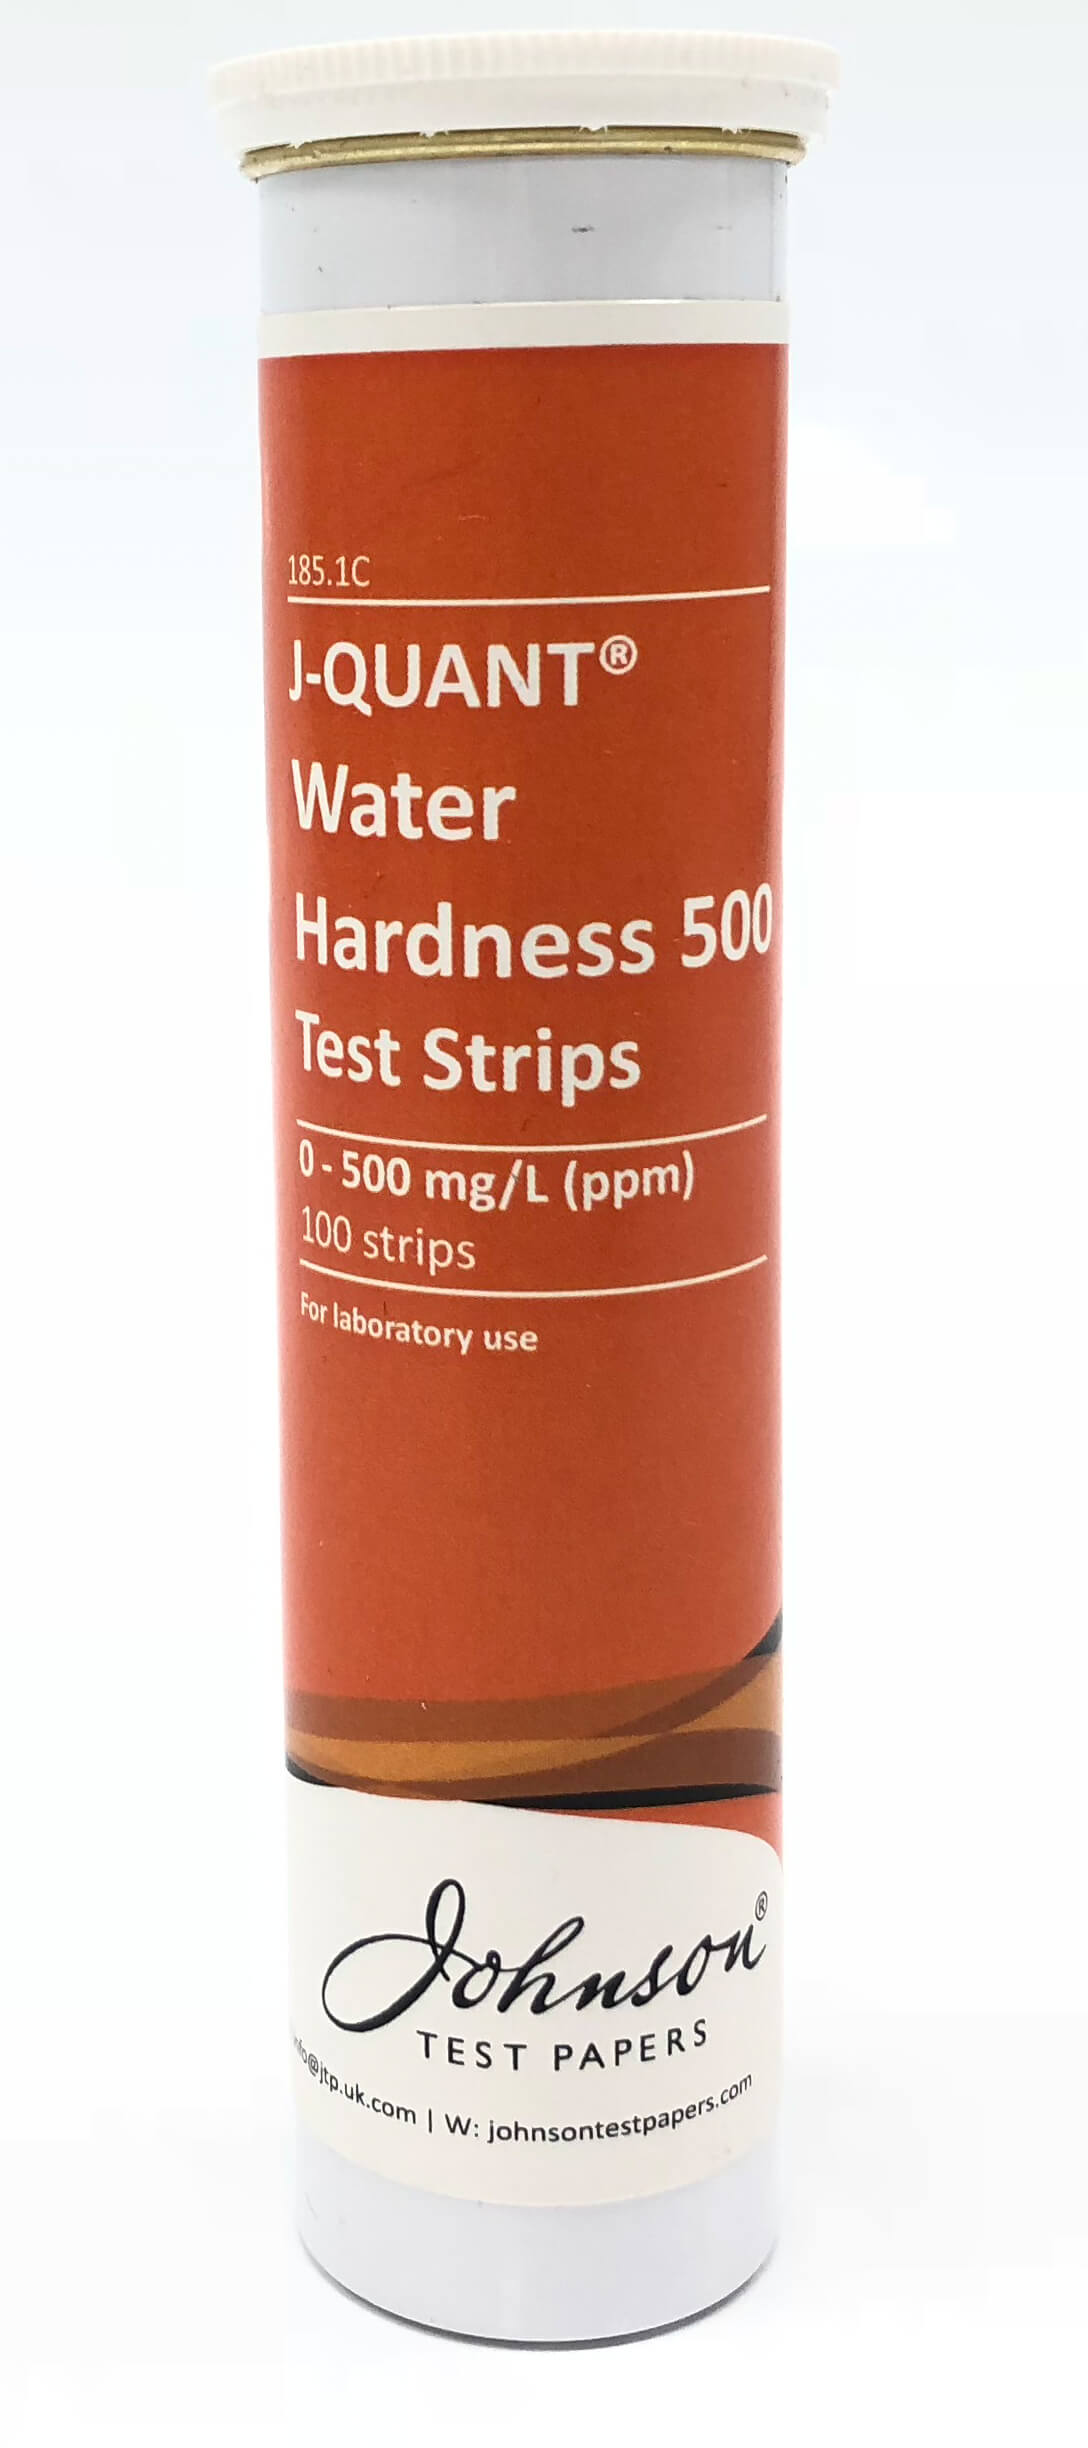 J-QUANT<sup>®</sup> Water Hardness